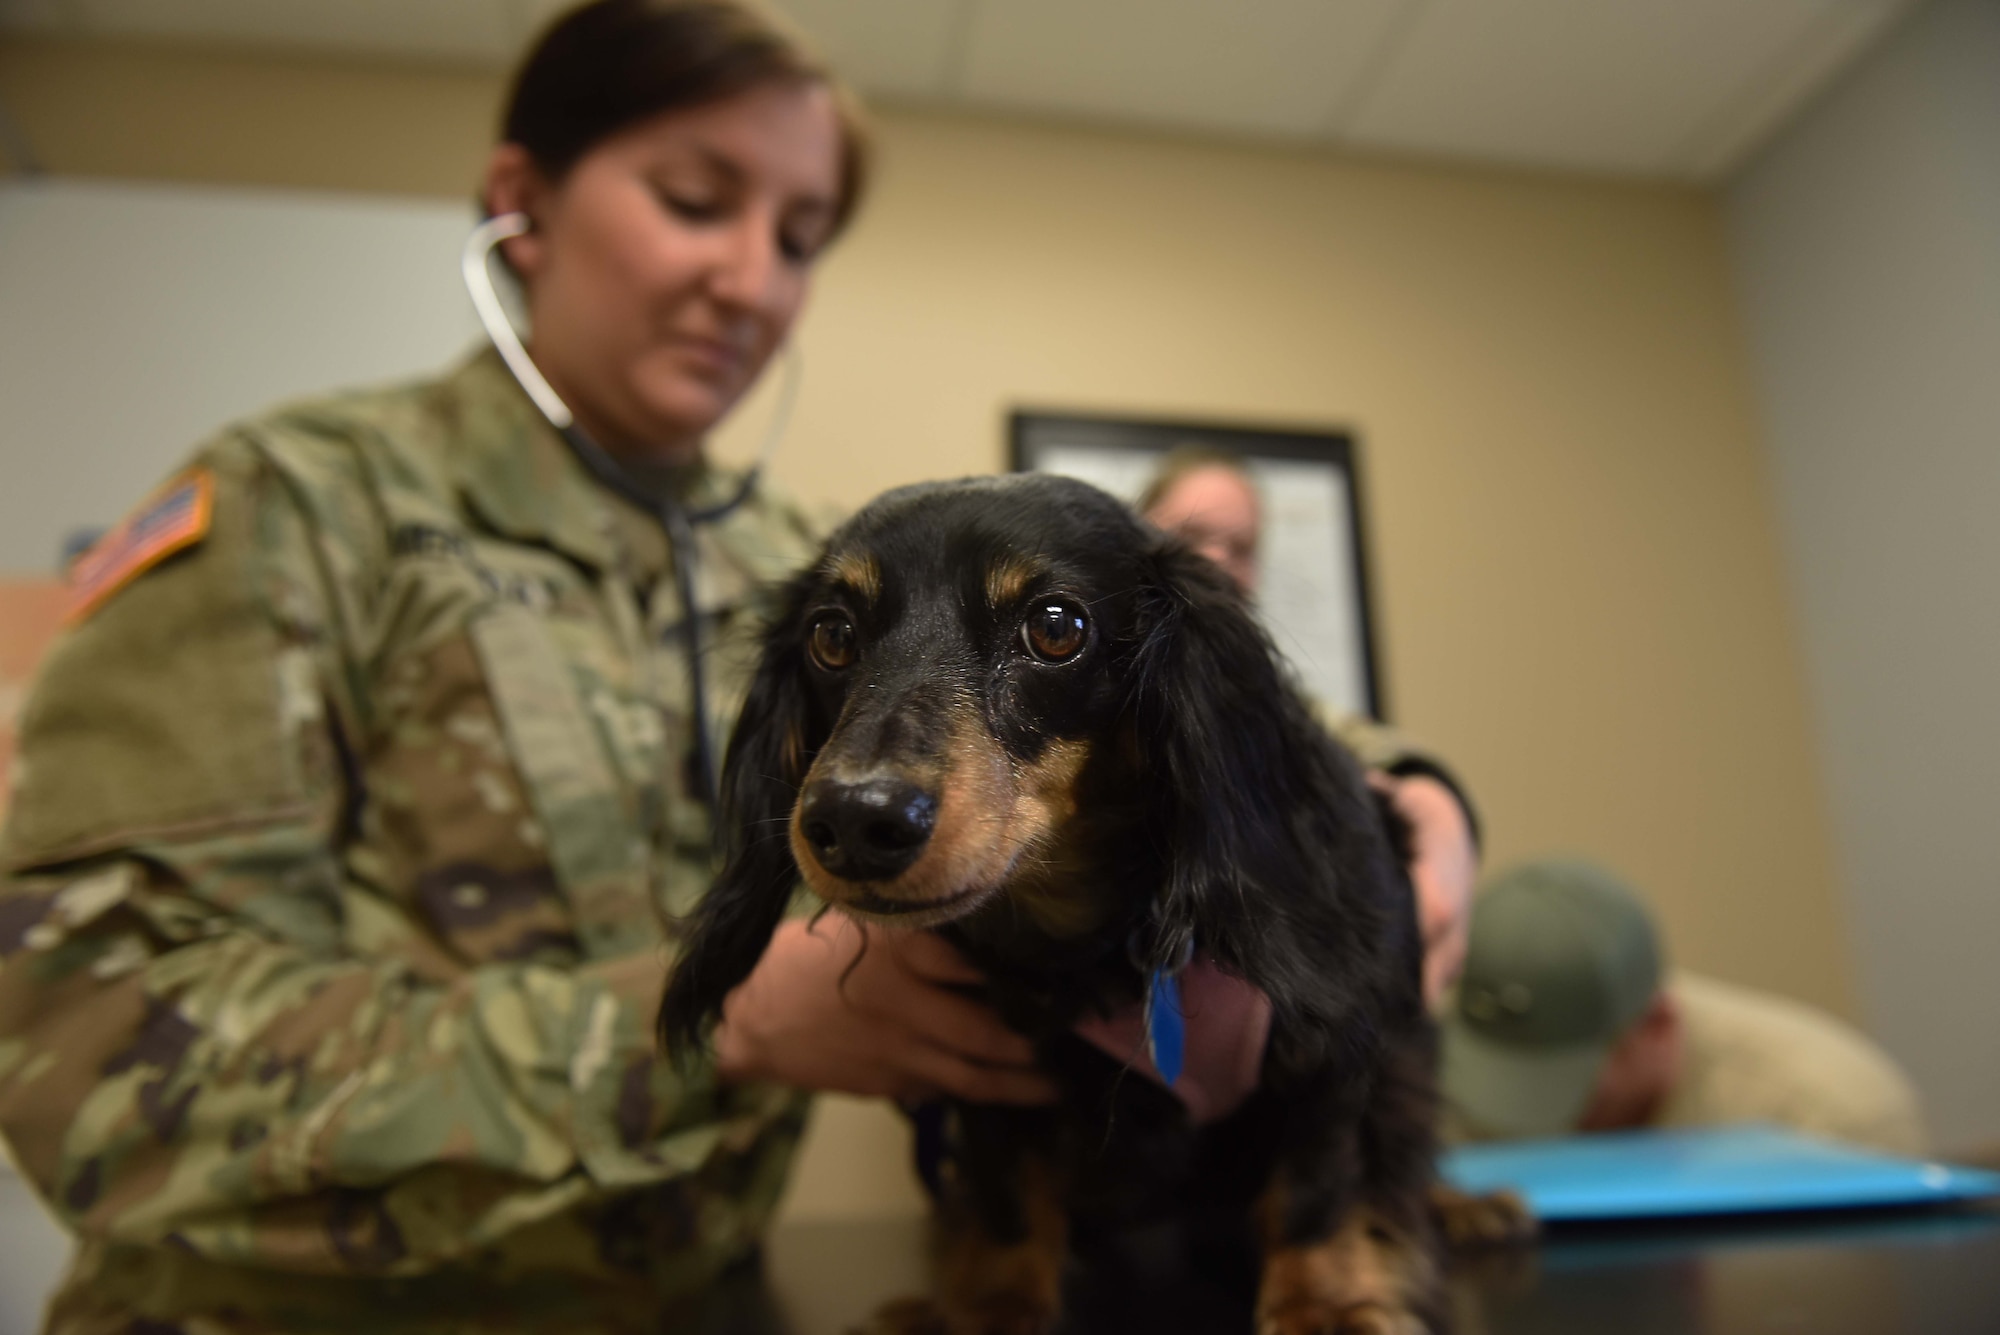 U.S. Army Capt. Sarah Merriday, Public Health Activity Veterinary Corps officer, monitors Sunny’s heartbeat April 17, 2017, at the Little Rock Air Force Base Veterinary Treatment Facility on Little Rock AFB, Ark. The treatment facility personnel are subject matter experts in preparing service members and their pets for permanent change of stations when the mission allows it. (U.S. Air Force photo by Senior Airman Mercedes Taylor)